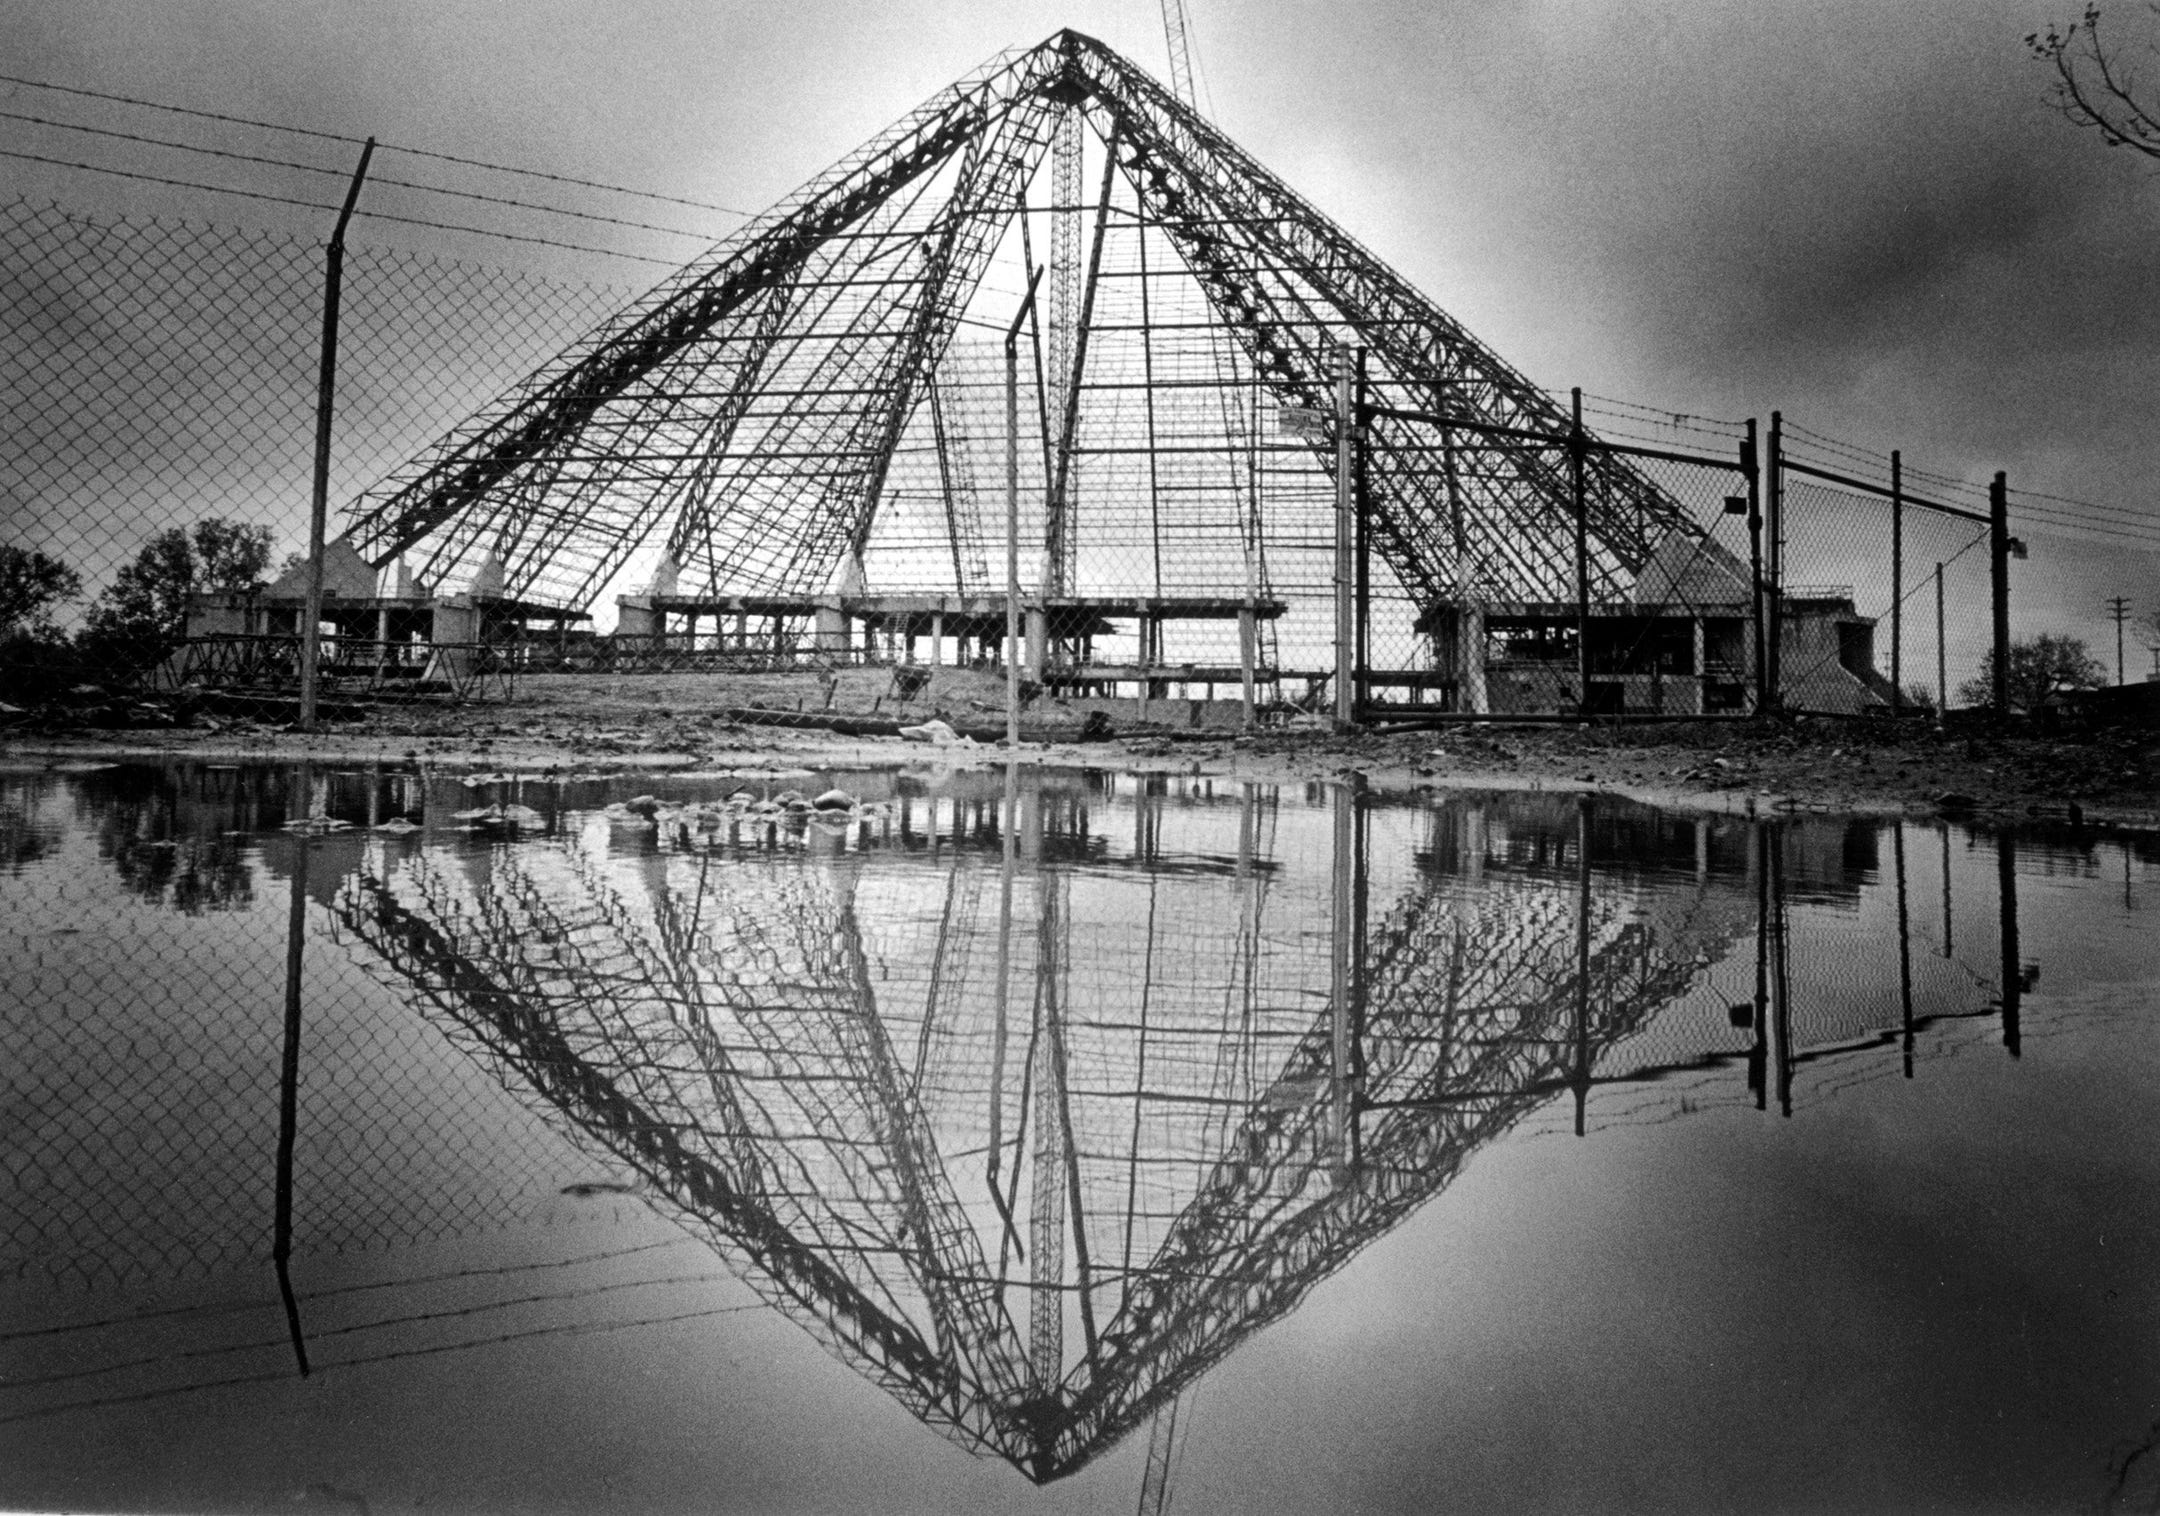 Memphis Pyramid turns 30: From home of Tigers and Grizzlies to Bass Pro